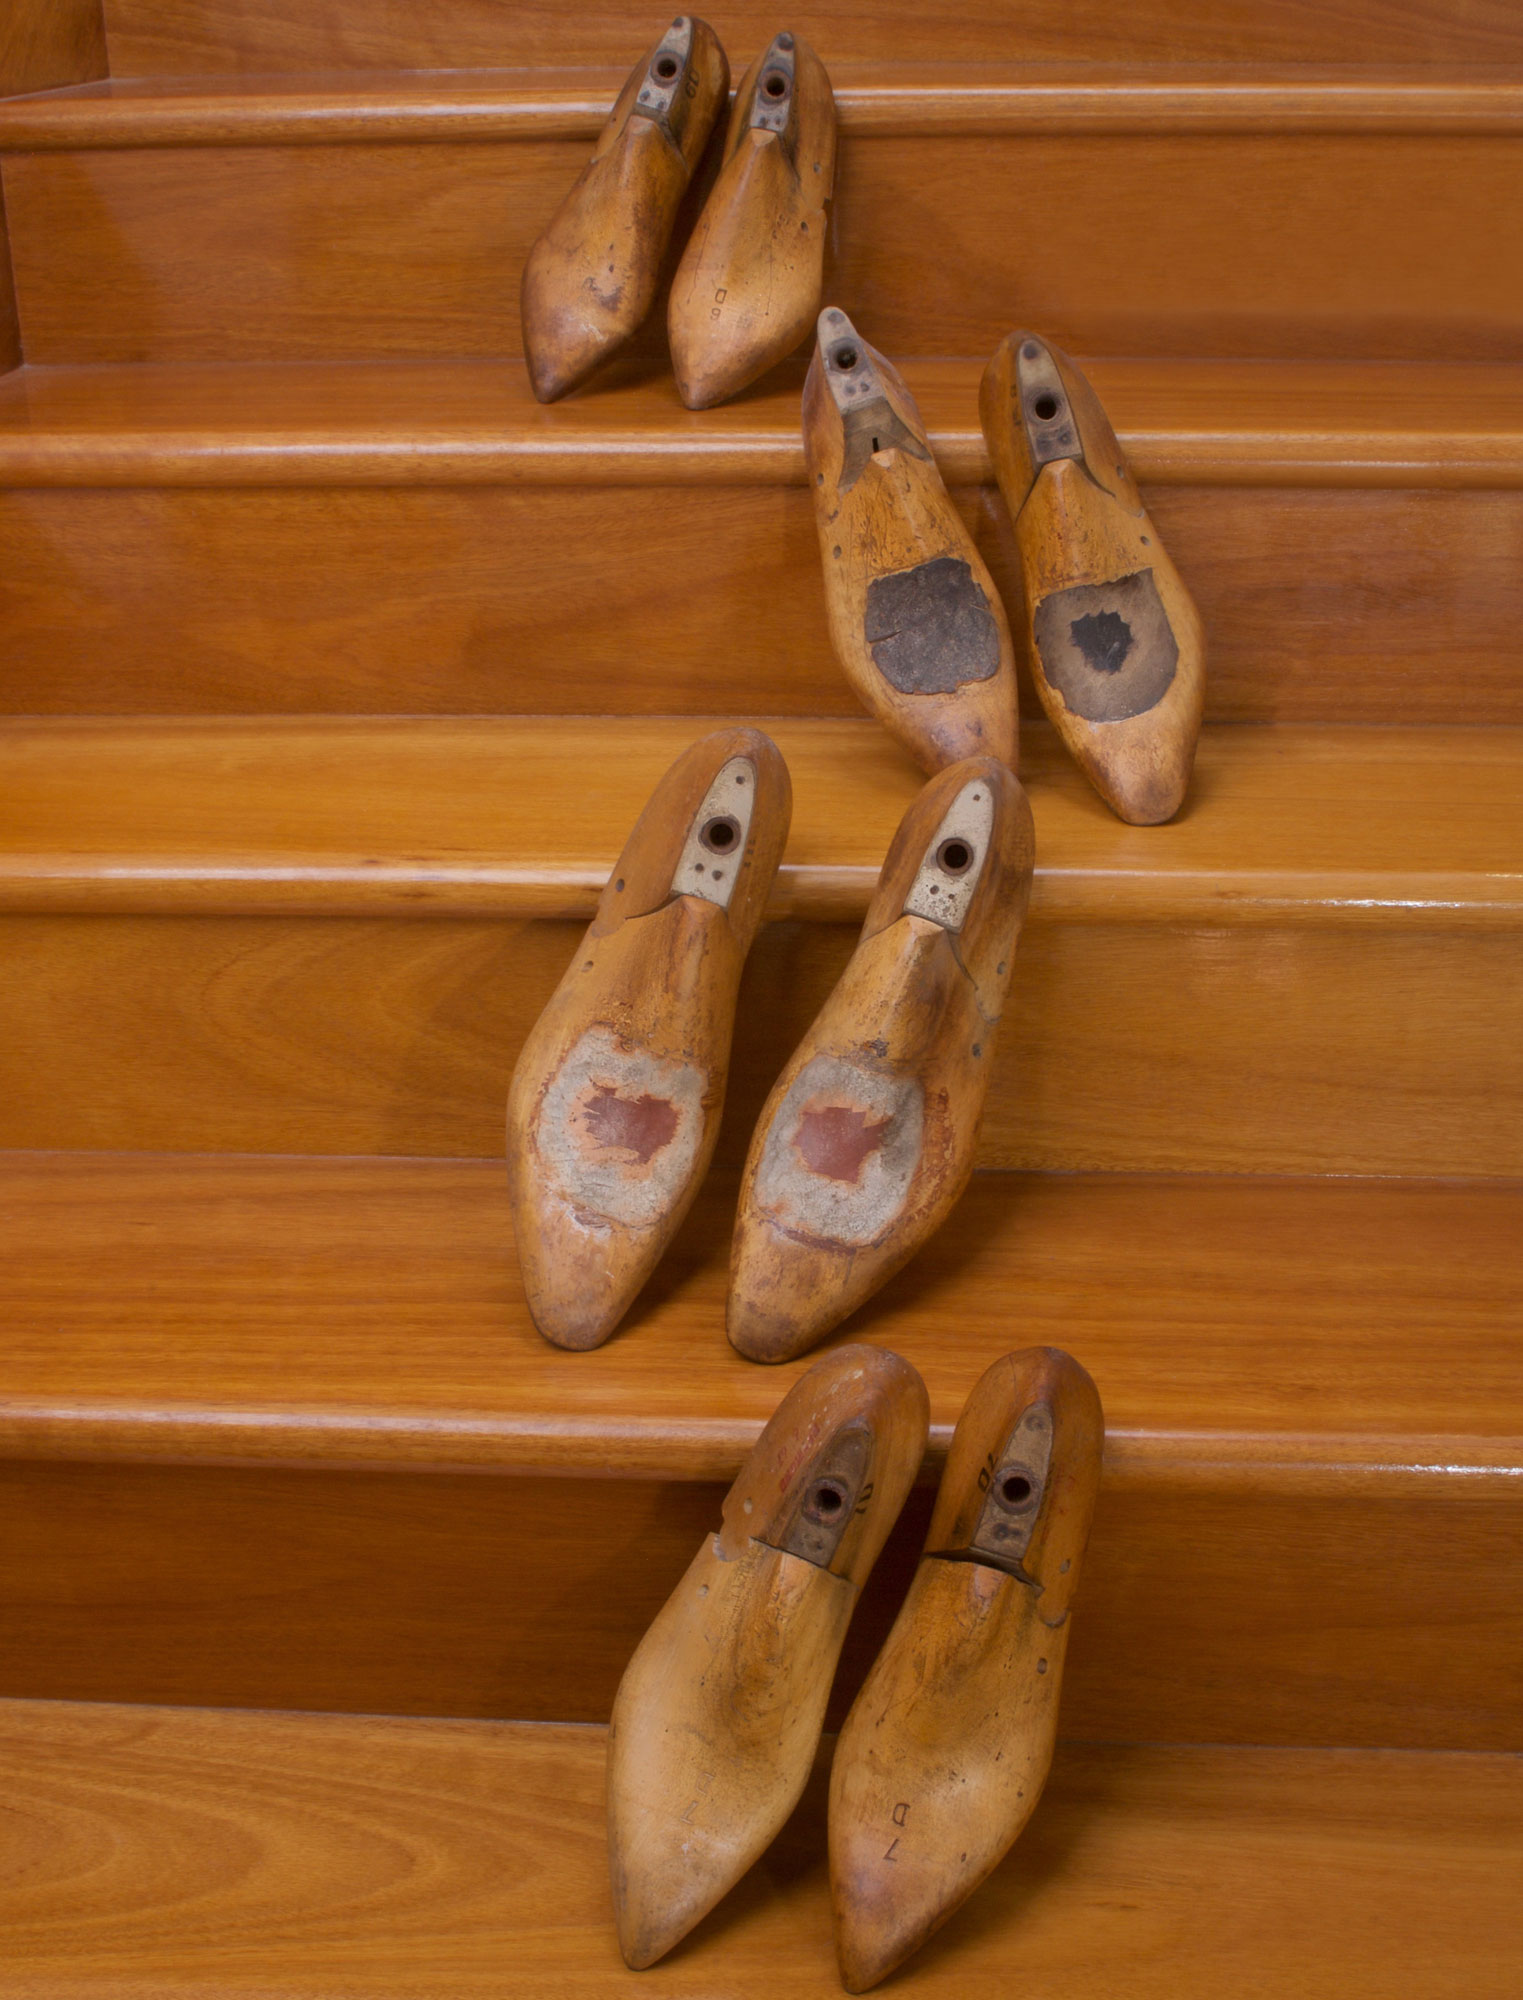 BEAUTIFUL PAIRS OF VINTAGE HAND-CRAFTED, BESPOKE WOODEN SHOE LASTS 